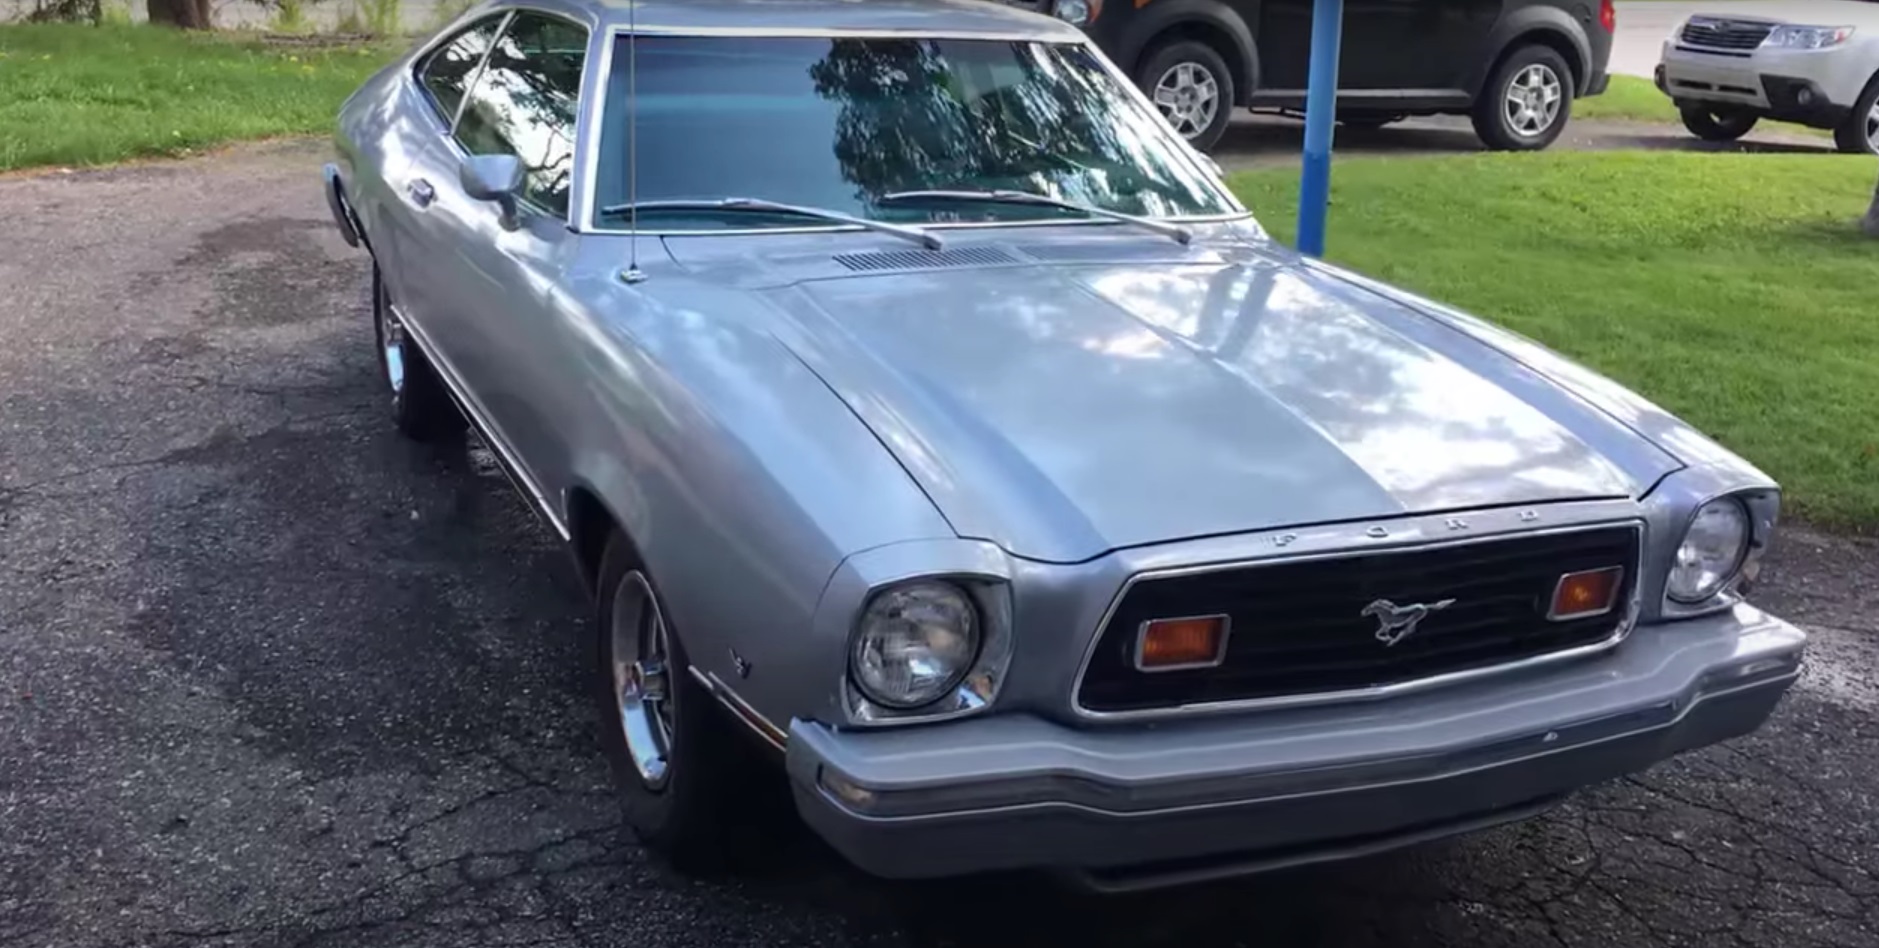 Video: 1976 Ford Mustang Mach 1 Quick Tour